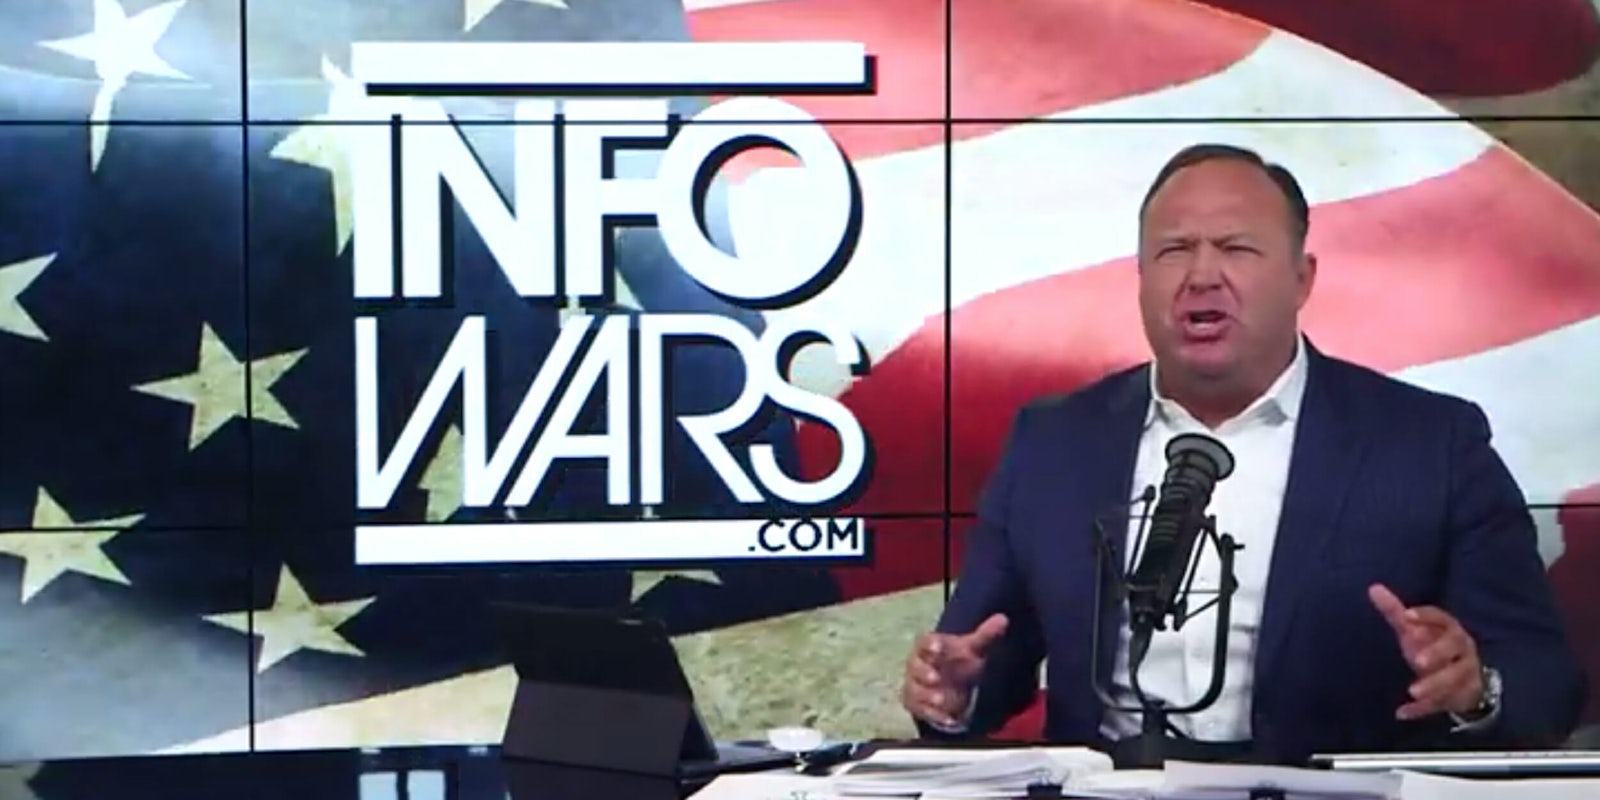 Alex Jones, of InfoWars, claims Donald Trump is being poisoned by globalists.